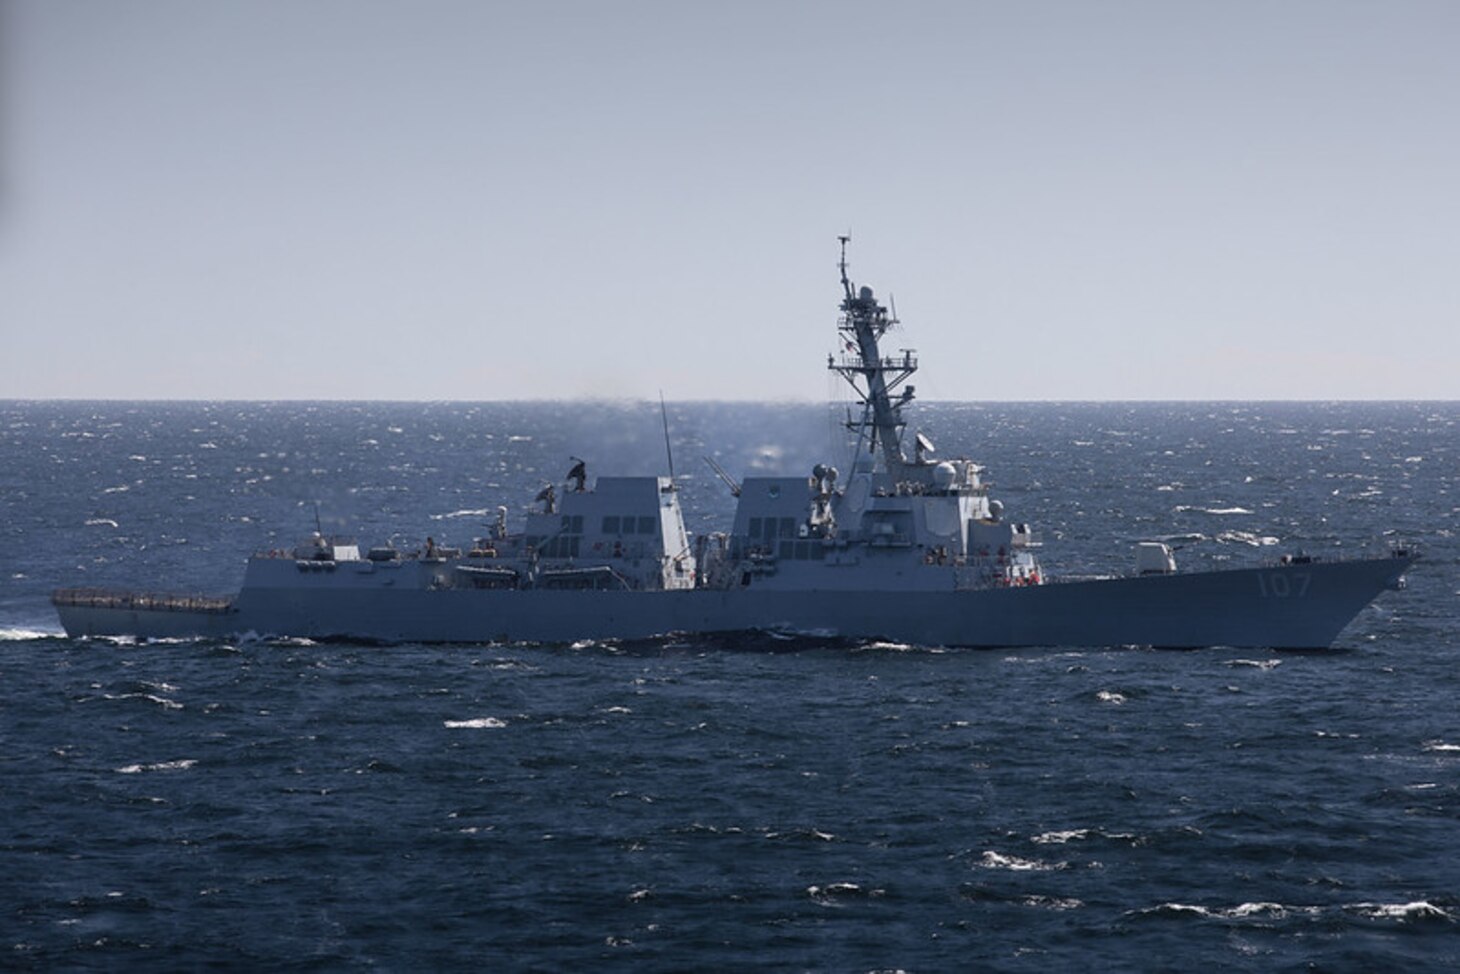 Arleigh Burke-class guided-missile destroyer USS Gravely (DDG 107) sails alongside the Wasp-class amphibious assault ship USS Kearsarge (LHD 3) during maneuvering exercises with the Finnish Navy in the Baltic Sea, May 16, 2022. Kearsarge, flagship of the Kearsarge ARG/MEU team, is on a scheduled deployment under the command and control of Task Force 61/2 while operating in U.S. Sixth Fleet in support of U.S., Allied and partner interests in Europe and Africa.